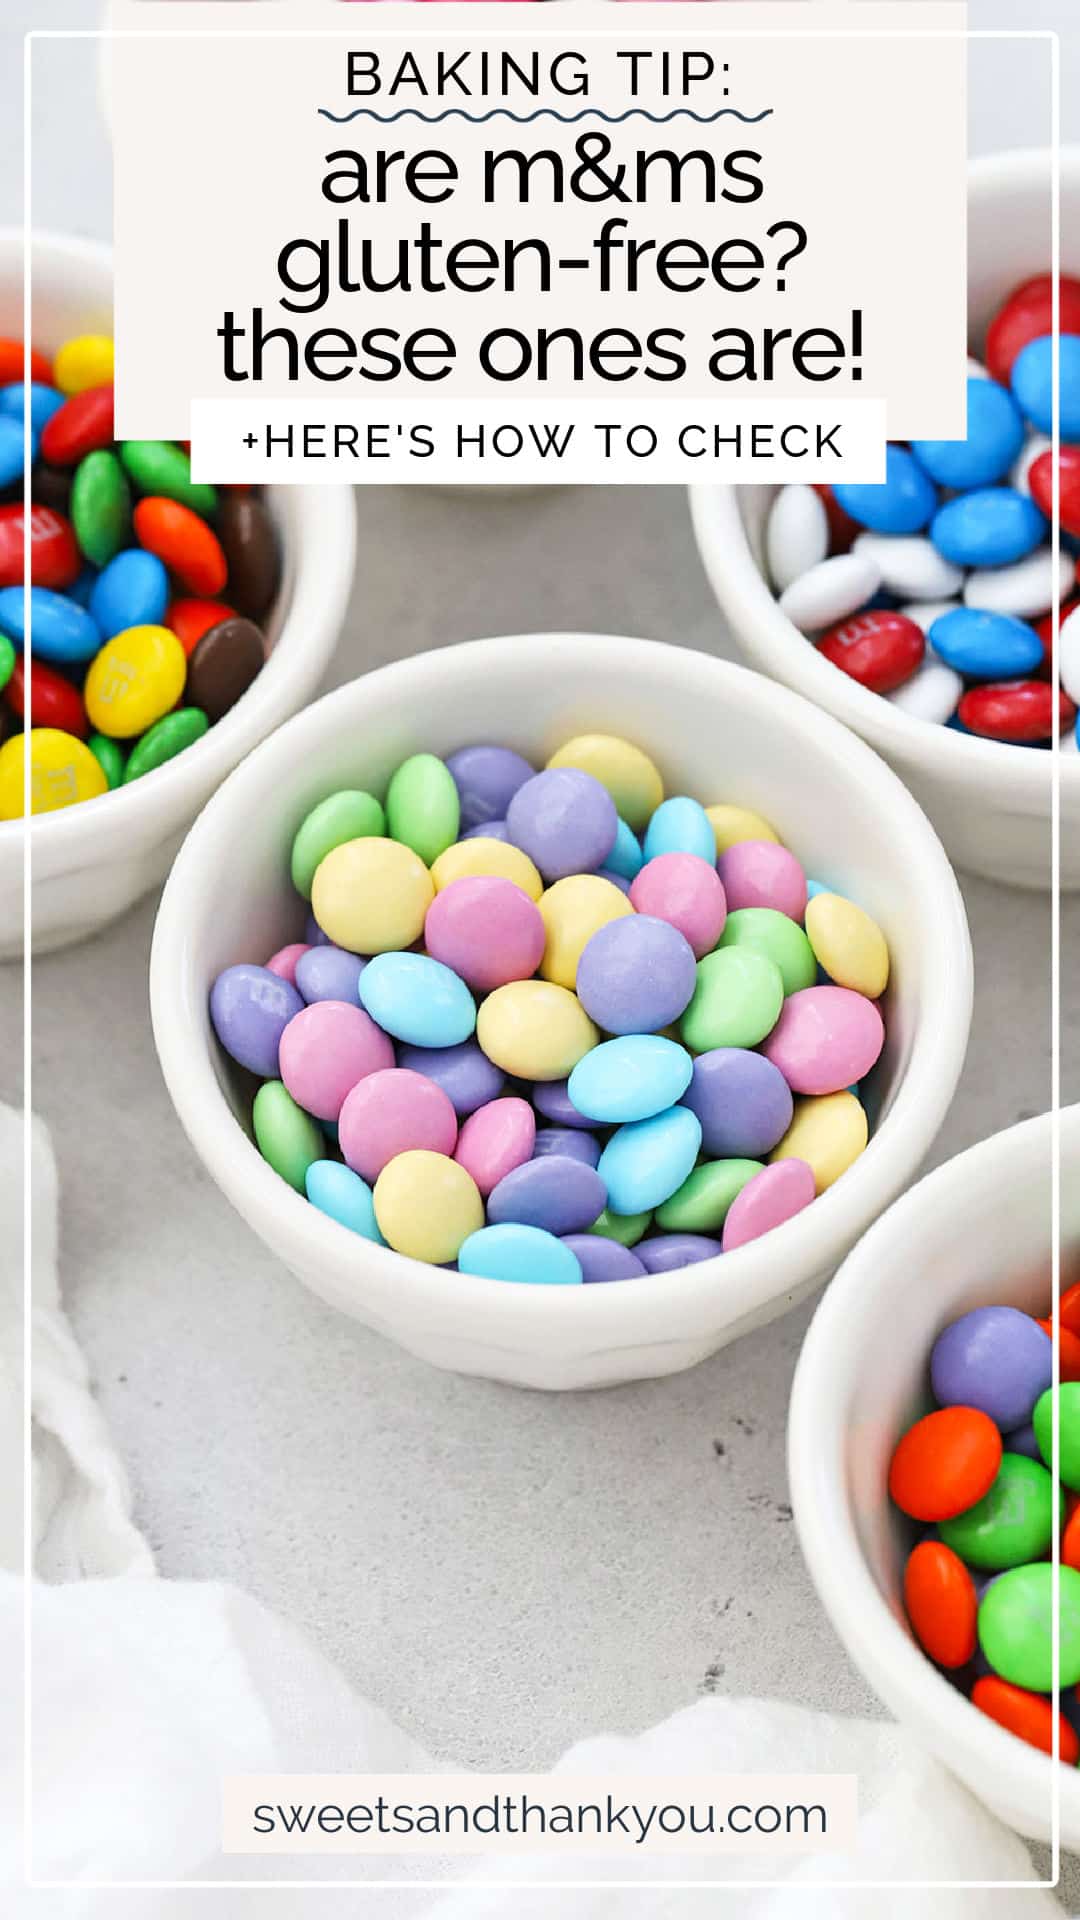 Are M&Ms Gluten-Free? - Many varieties of M&Ms ARE Gluten-Free! Here's everything you need to know about finding gluten-free M&Ms. / which m&ms are gluten-free / what flavors of m&ms are gluten-free / gluten-free m&ms / are peanut m&ms gluten-free / are peanut butter m&ms gluten-free / what kinds of m&ms are gluten-free / are dark chocolate m&ms gluten-free / are milk chocolate m&ms gluten-free / are crispy m&ms gluten-free / are pretzel m&ms gluten-free / are caramel m&ms gluten-free /